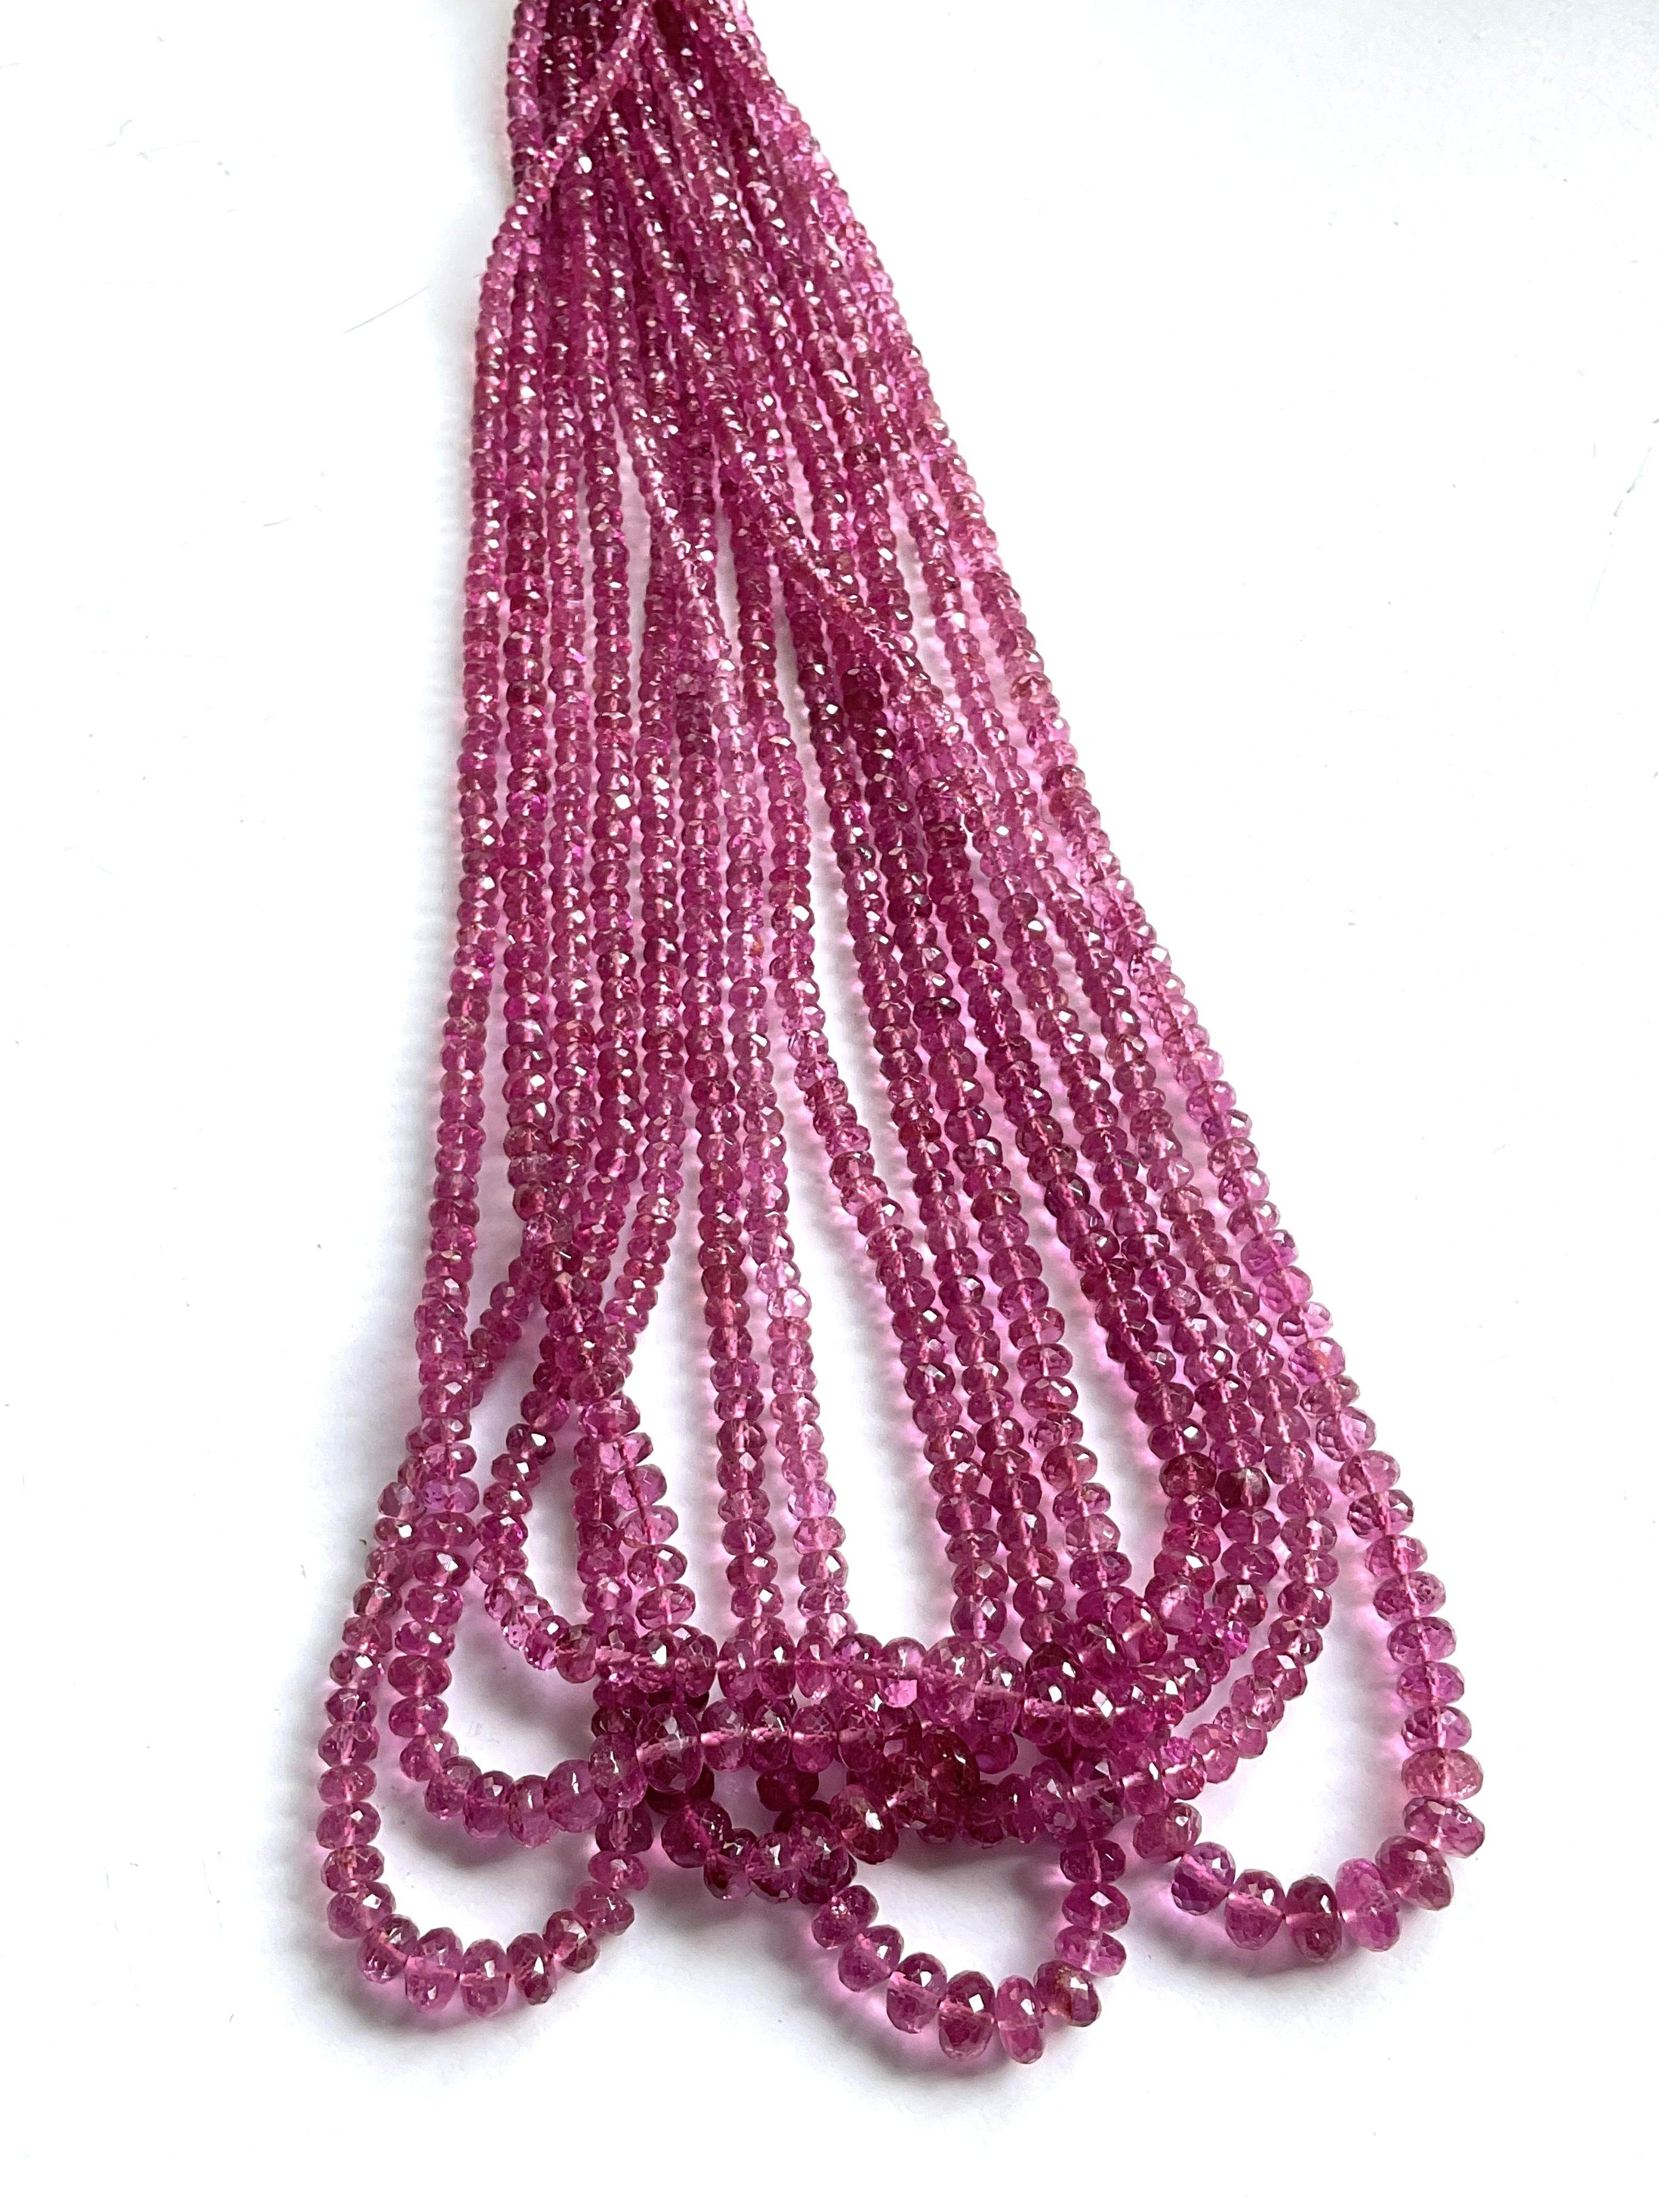 346.25 Carats Pink Tourmaline Beads Top Fine Quality For Jewelry Natural Gem For Sale 1